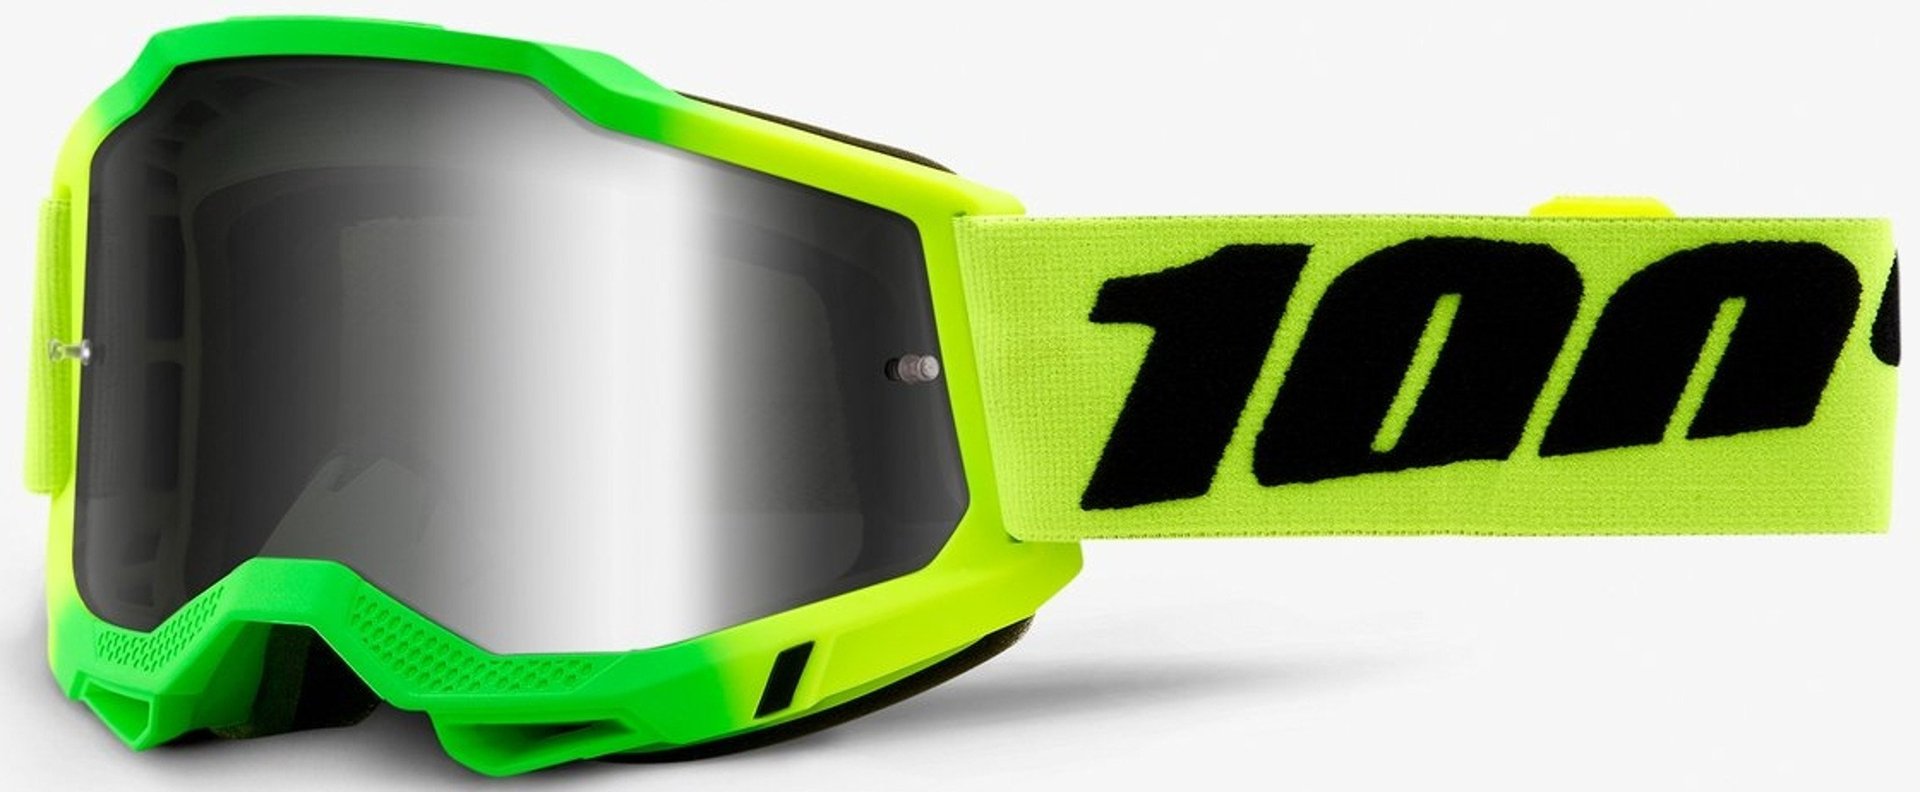 100% Accuri 2 Extra Travis Motocross Goggles, green-yellow, green-yellow, Size One Size